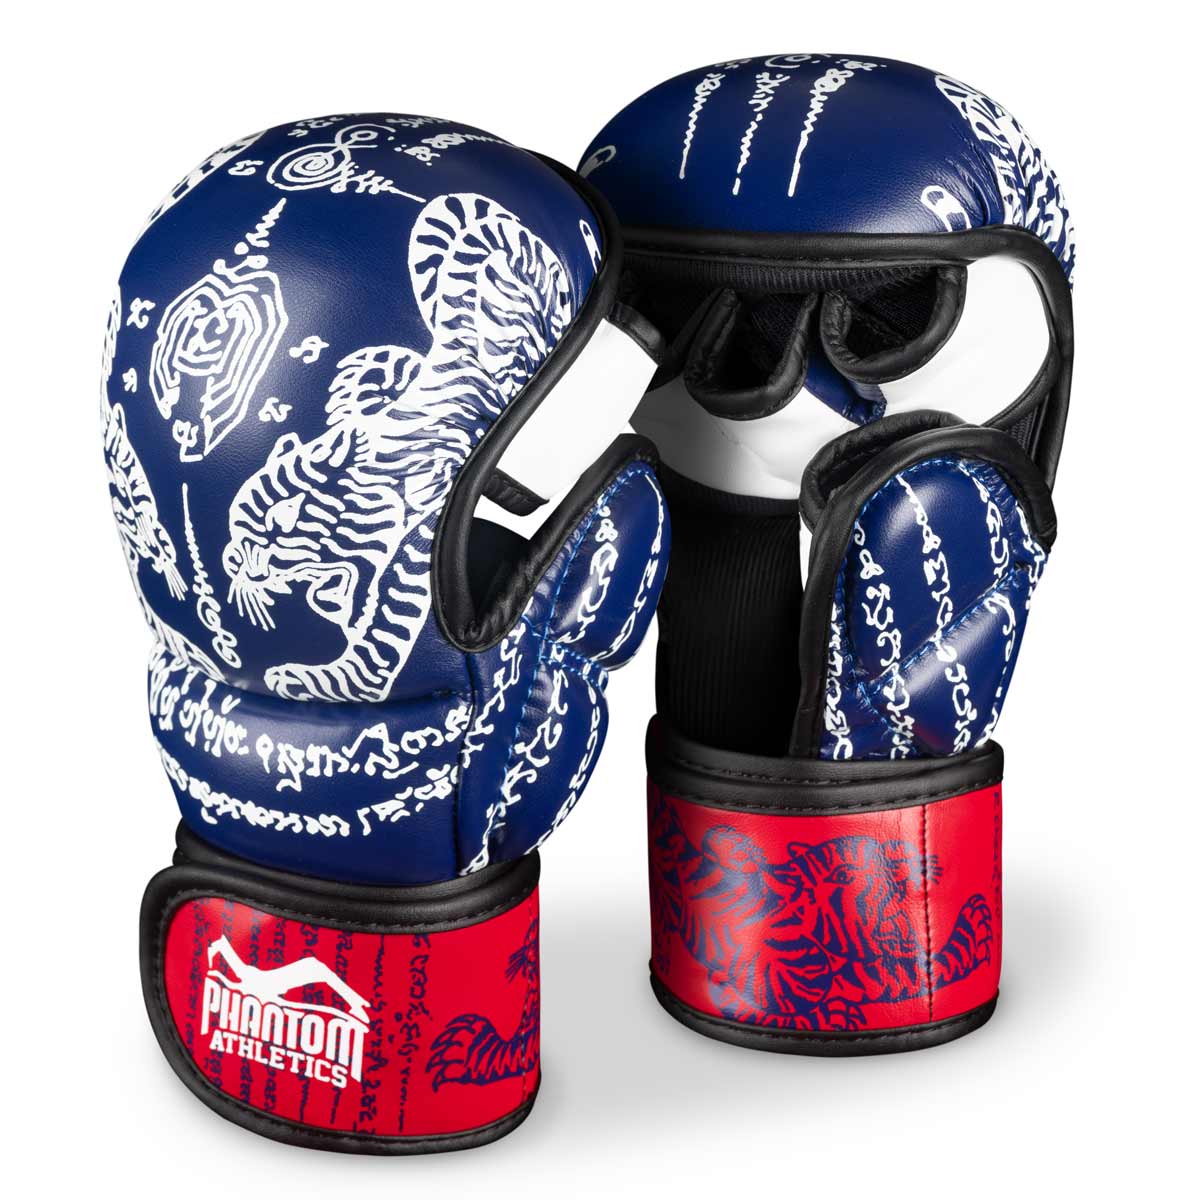 Phantom Muay Thai gloves for Thai boxing and MMA sparring, competition and training. In the traditional Sak Yant design and the color blue/red.